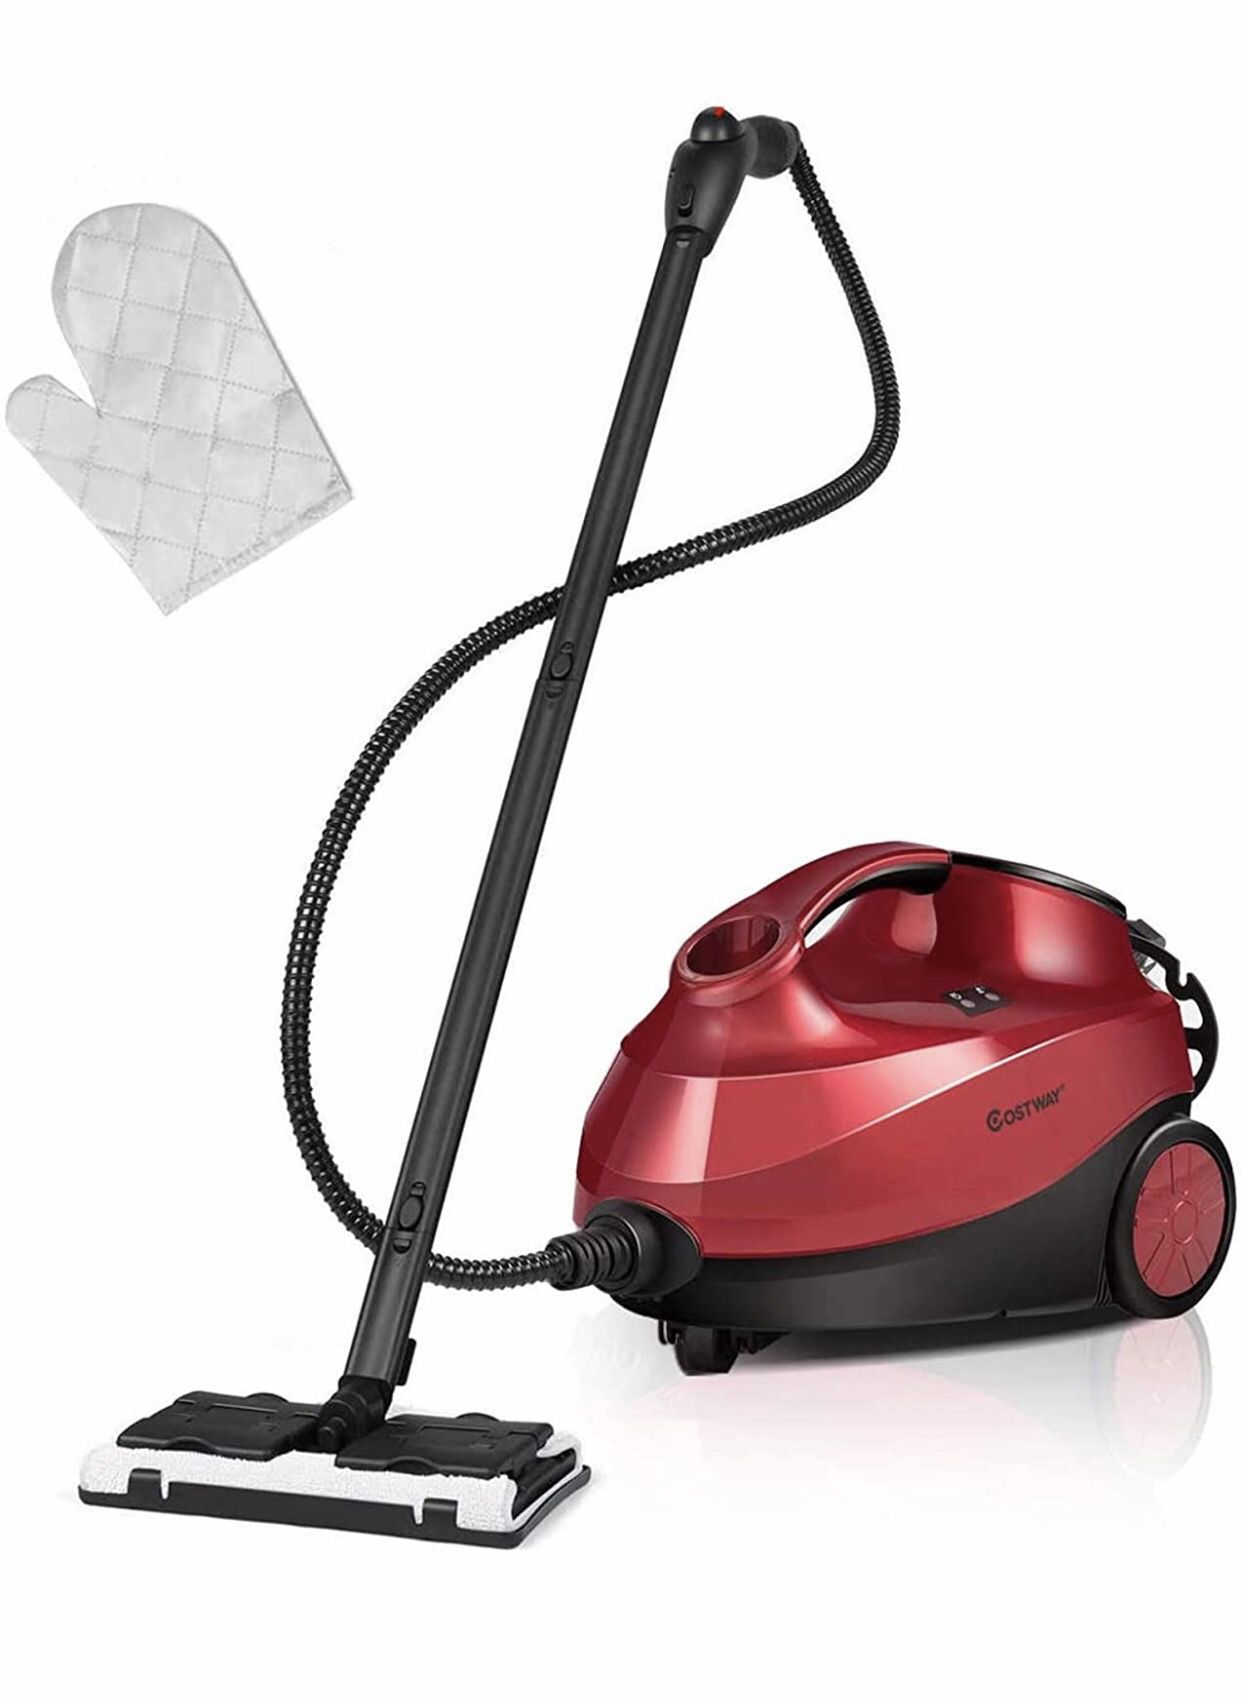 Multipurpose Steam Cleaner with Accessories